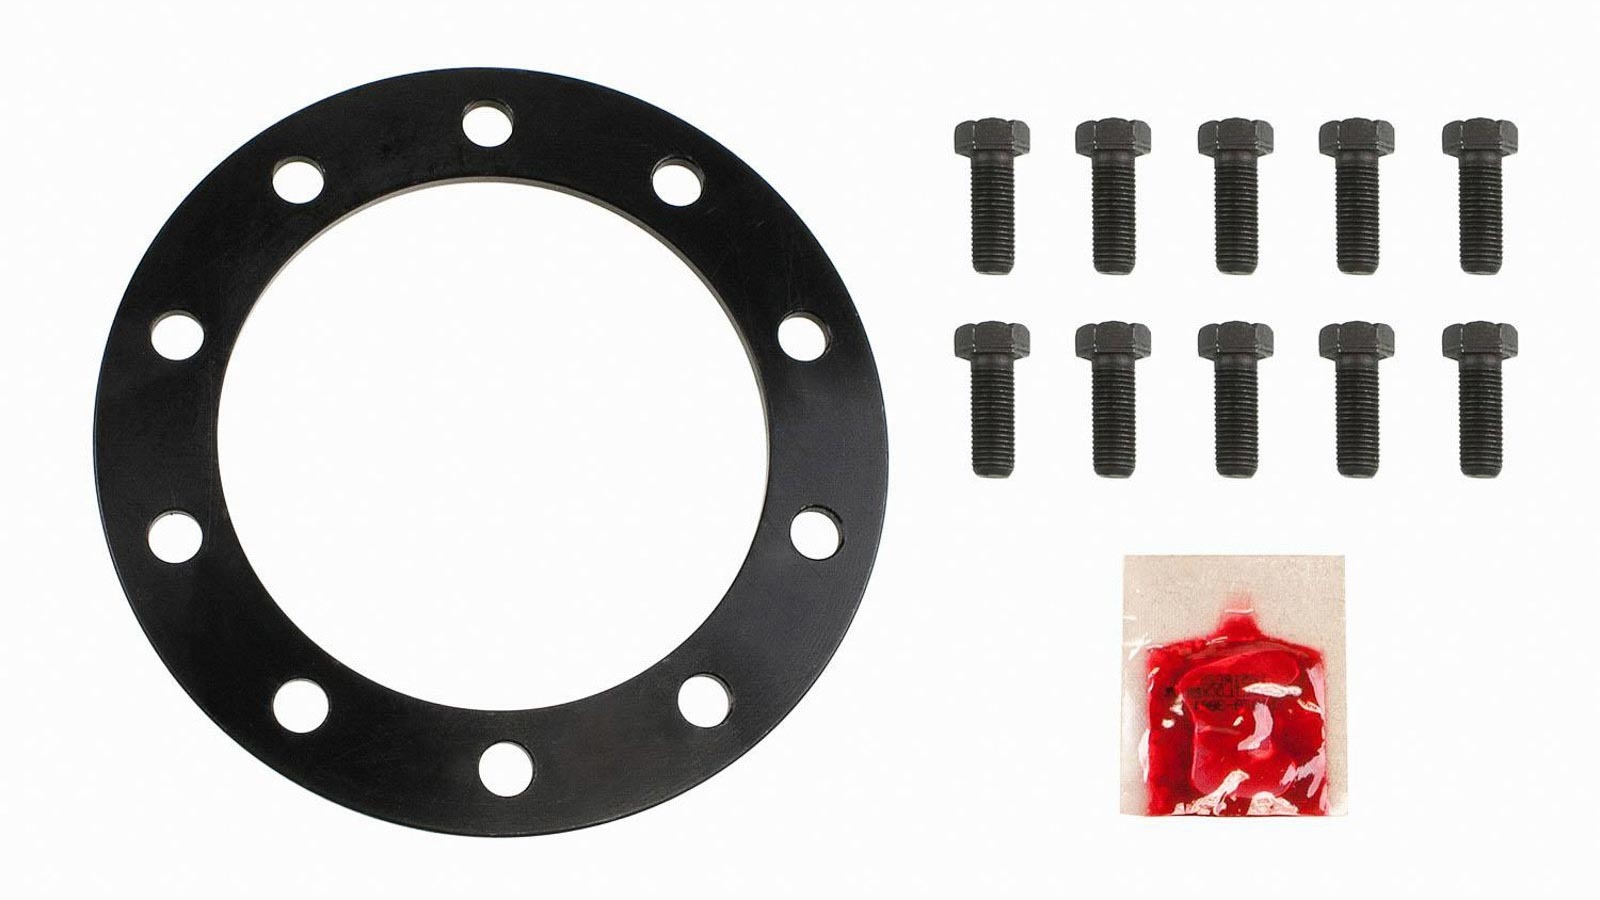 Motive Gear 085050 Ring Gear Spacer, 0.152 in Thick, Bolts, Steel, Black Oxide, 8.5 in, GM 10-Bolt, Kit